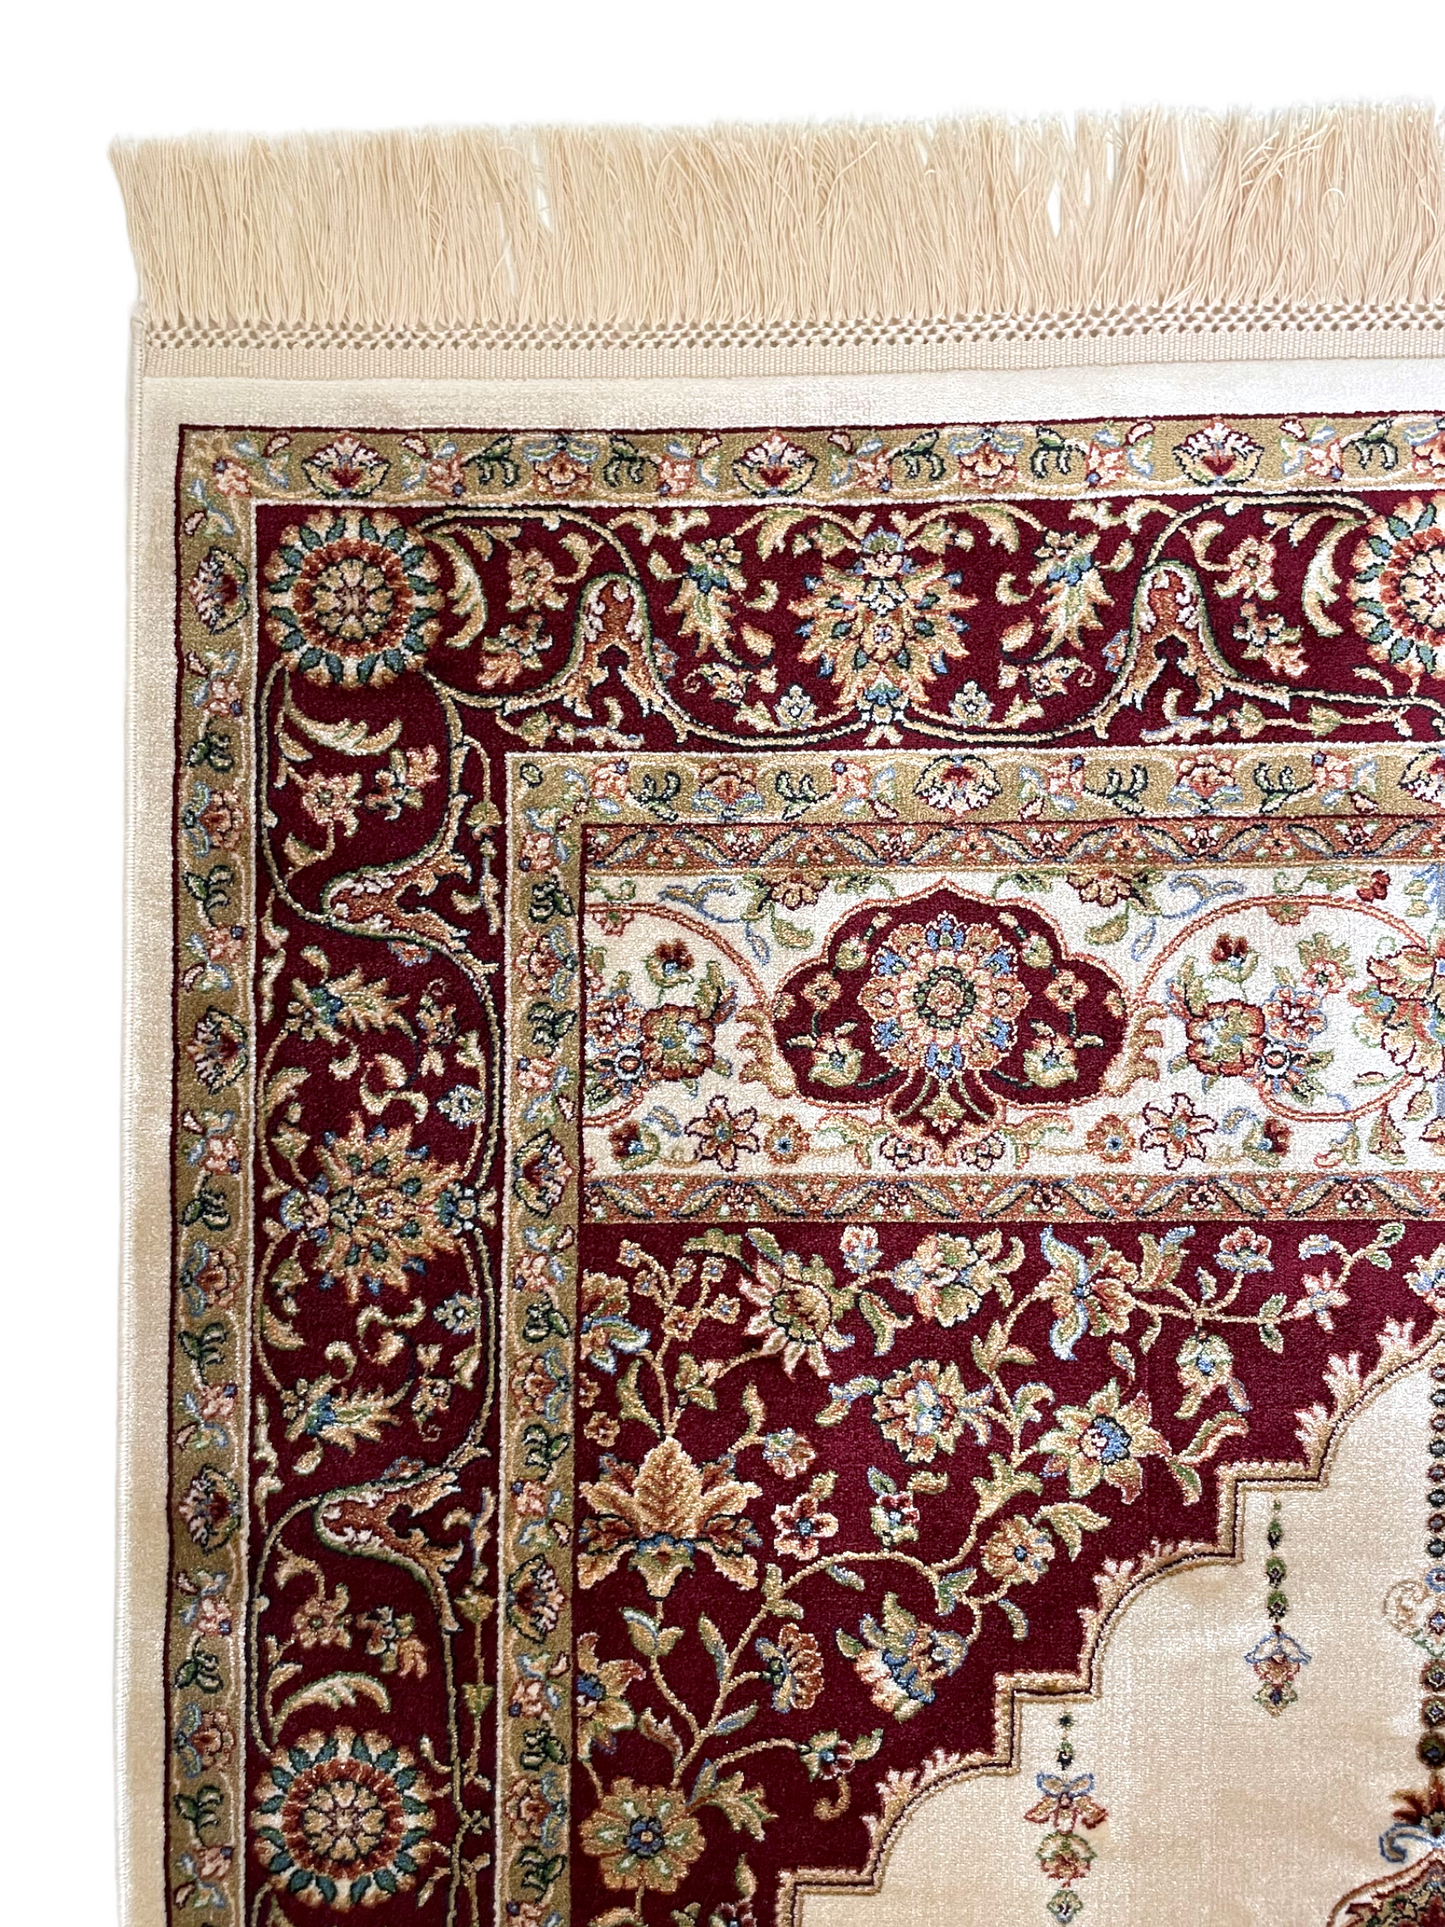 The Salik rug displays the traditional Islamic "mihrab" design with additional classic design elements. 